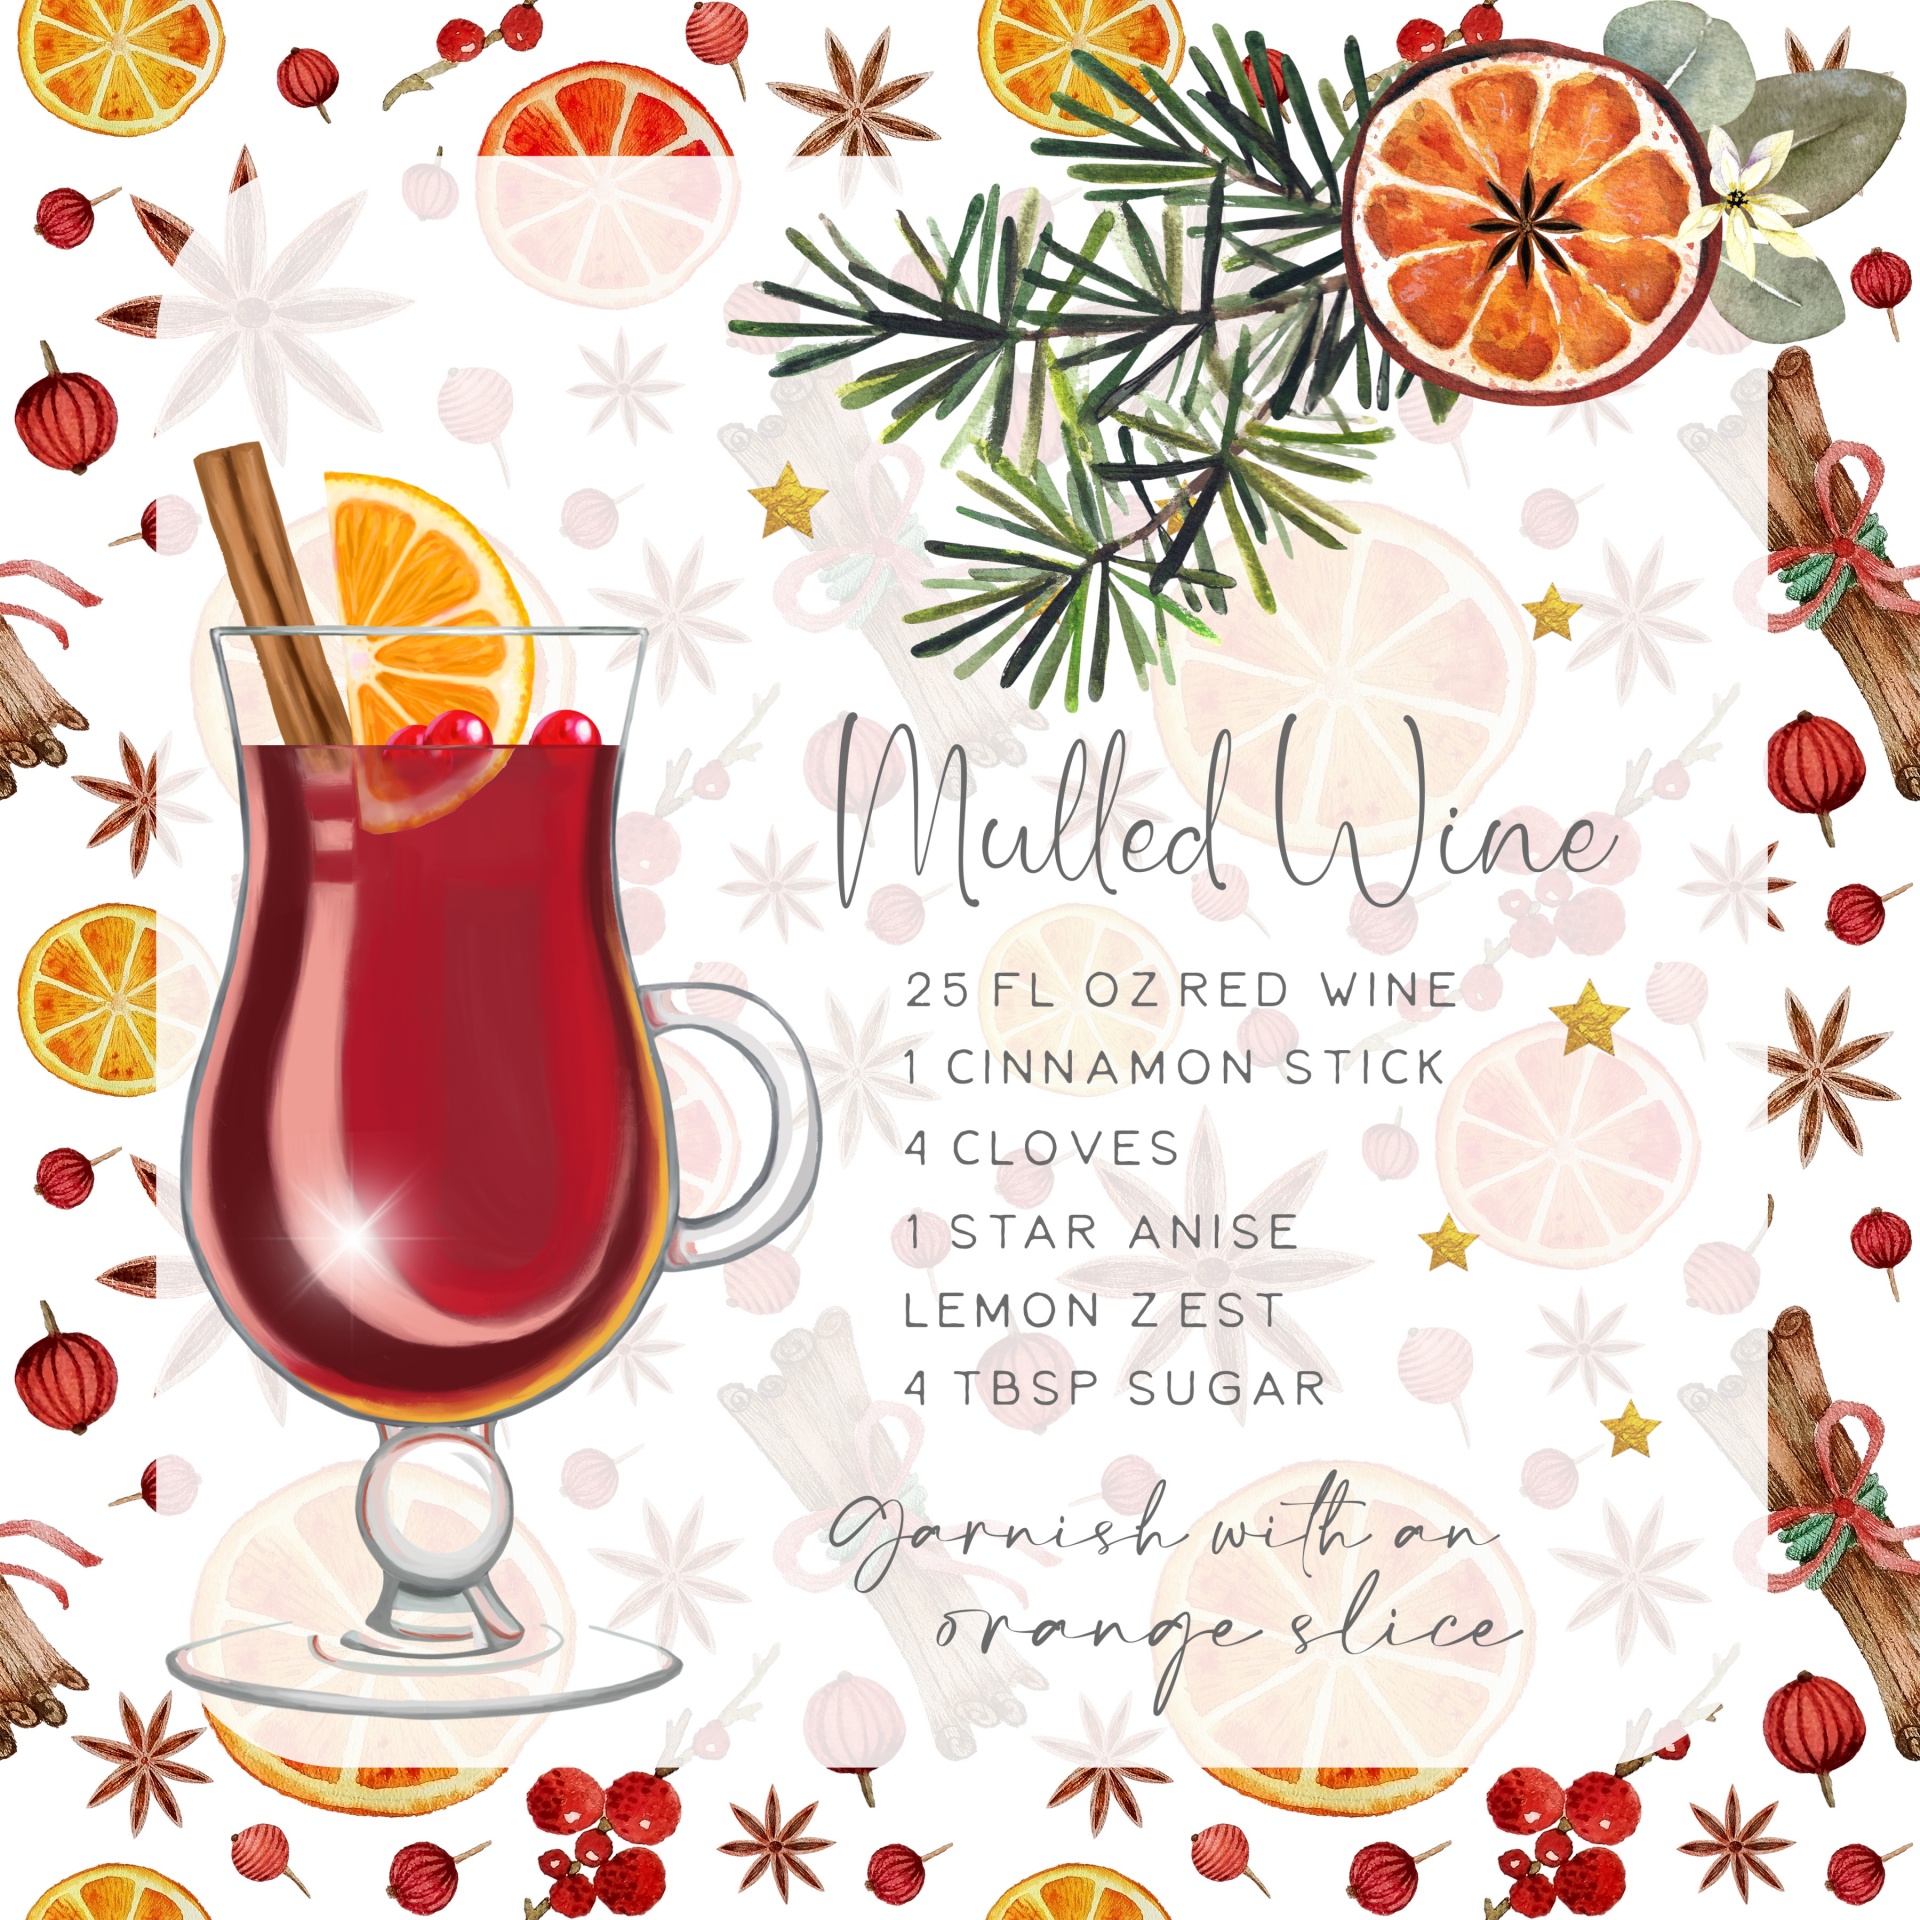 Mulled Wine Holiday Recipe